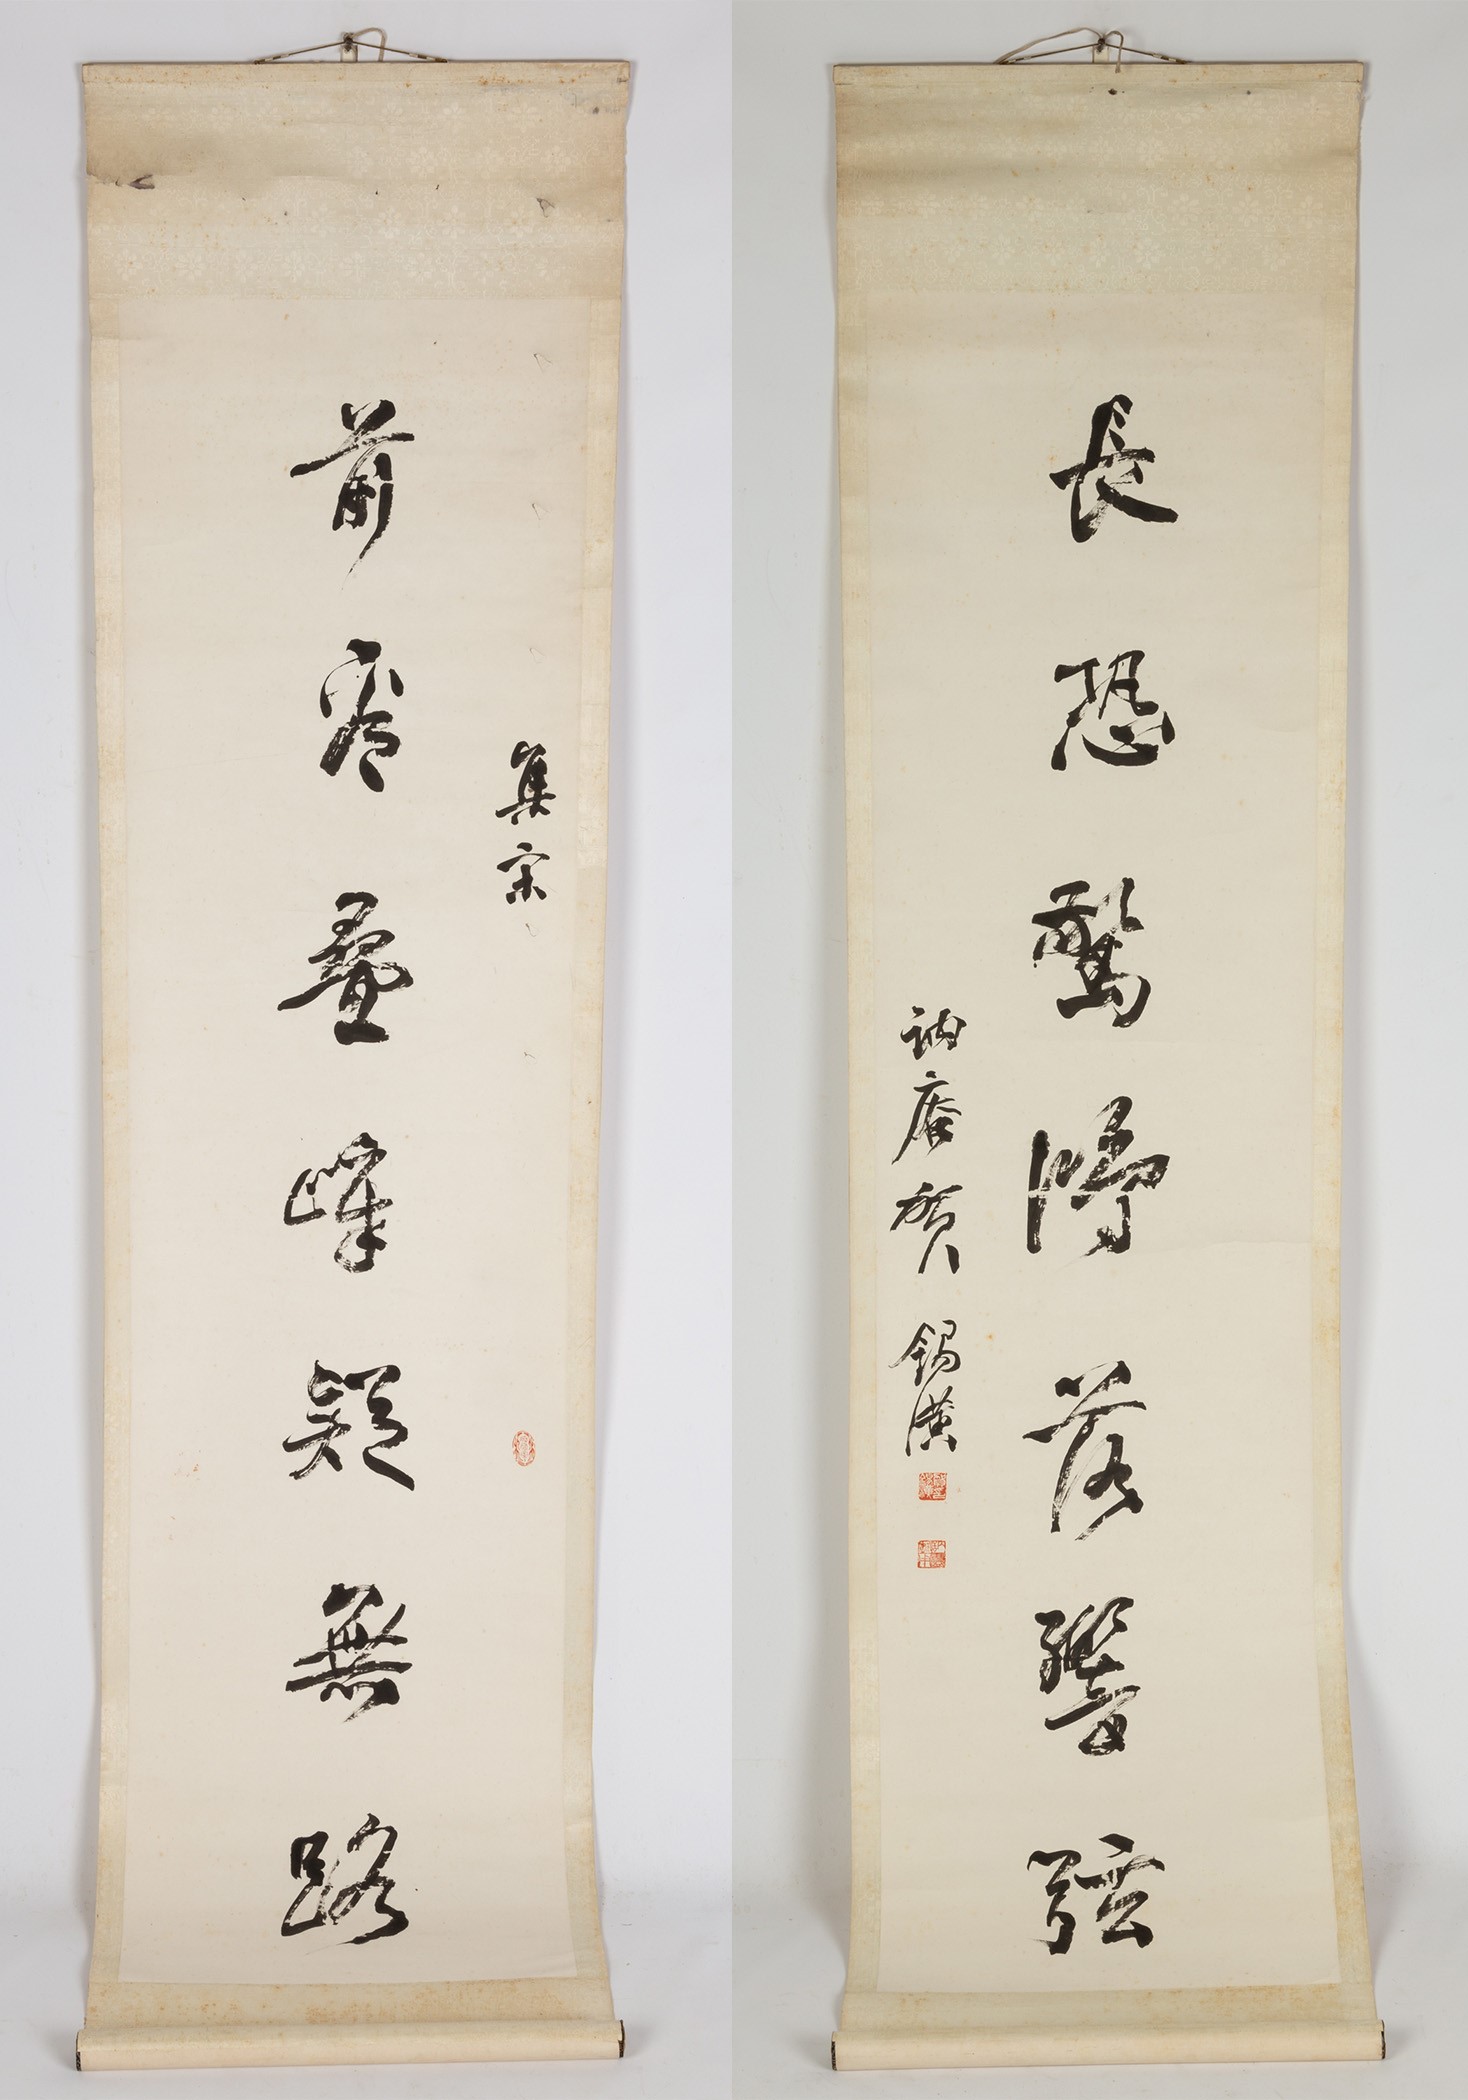  2 CHINESE HANGING SCROLLS painting 28bc66